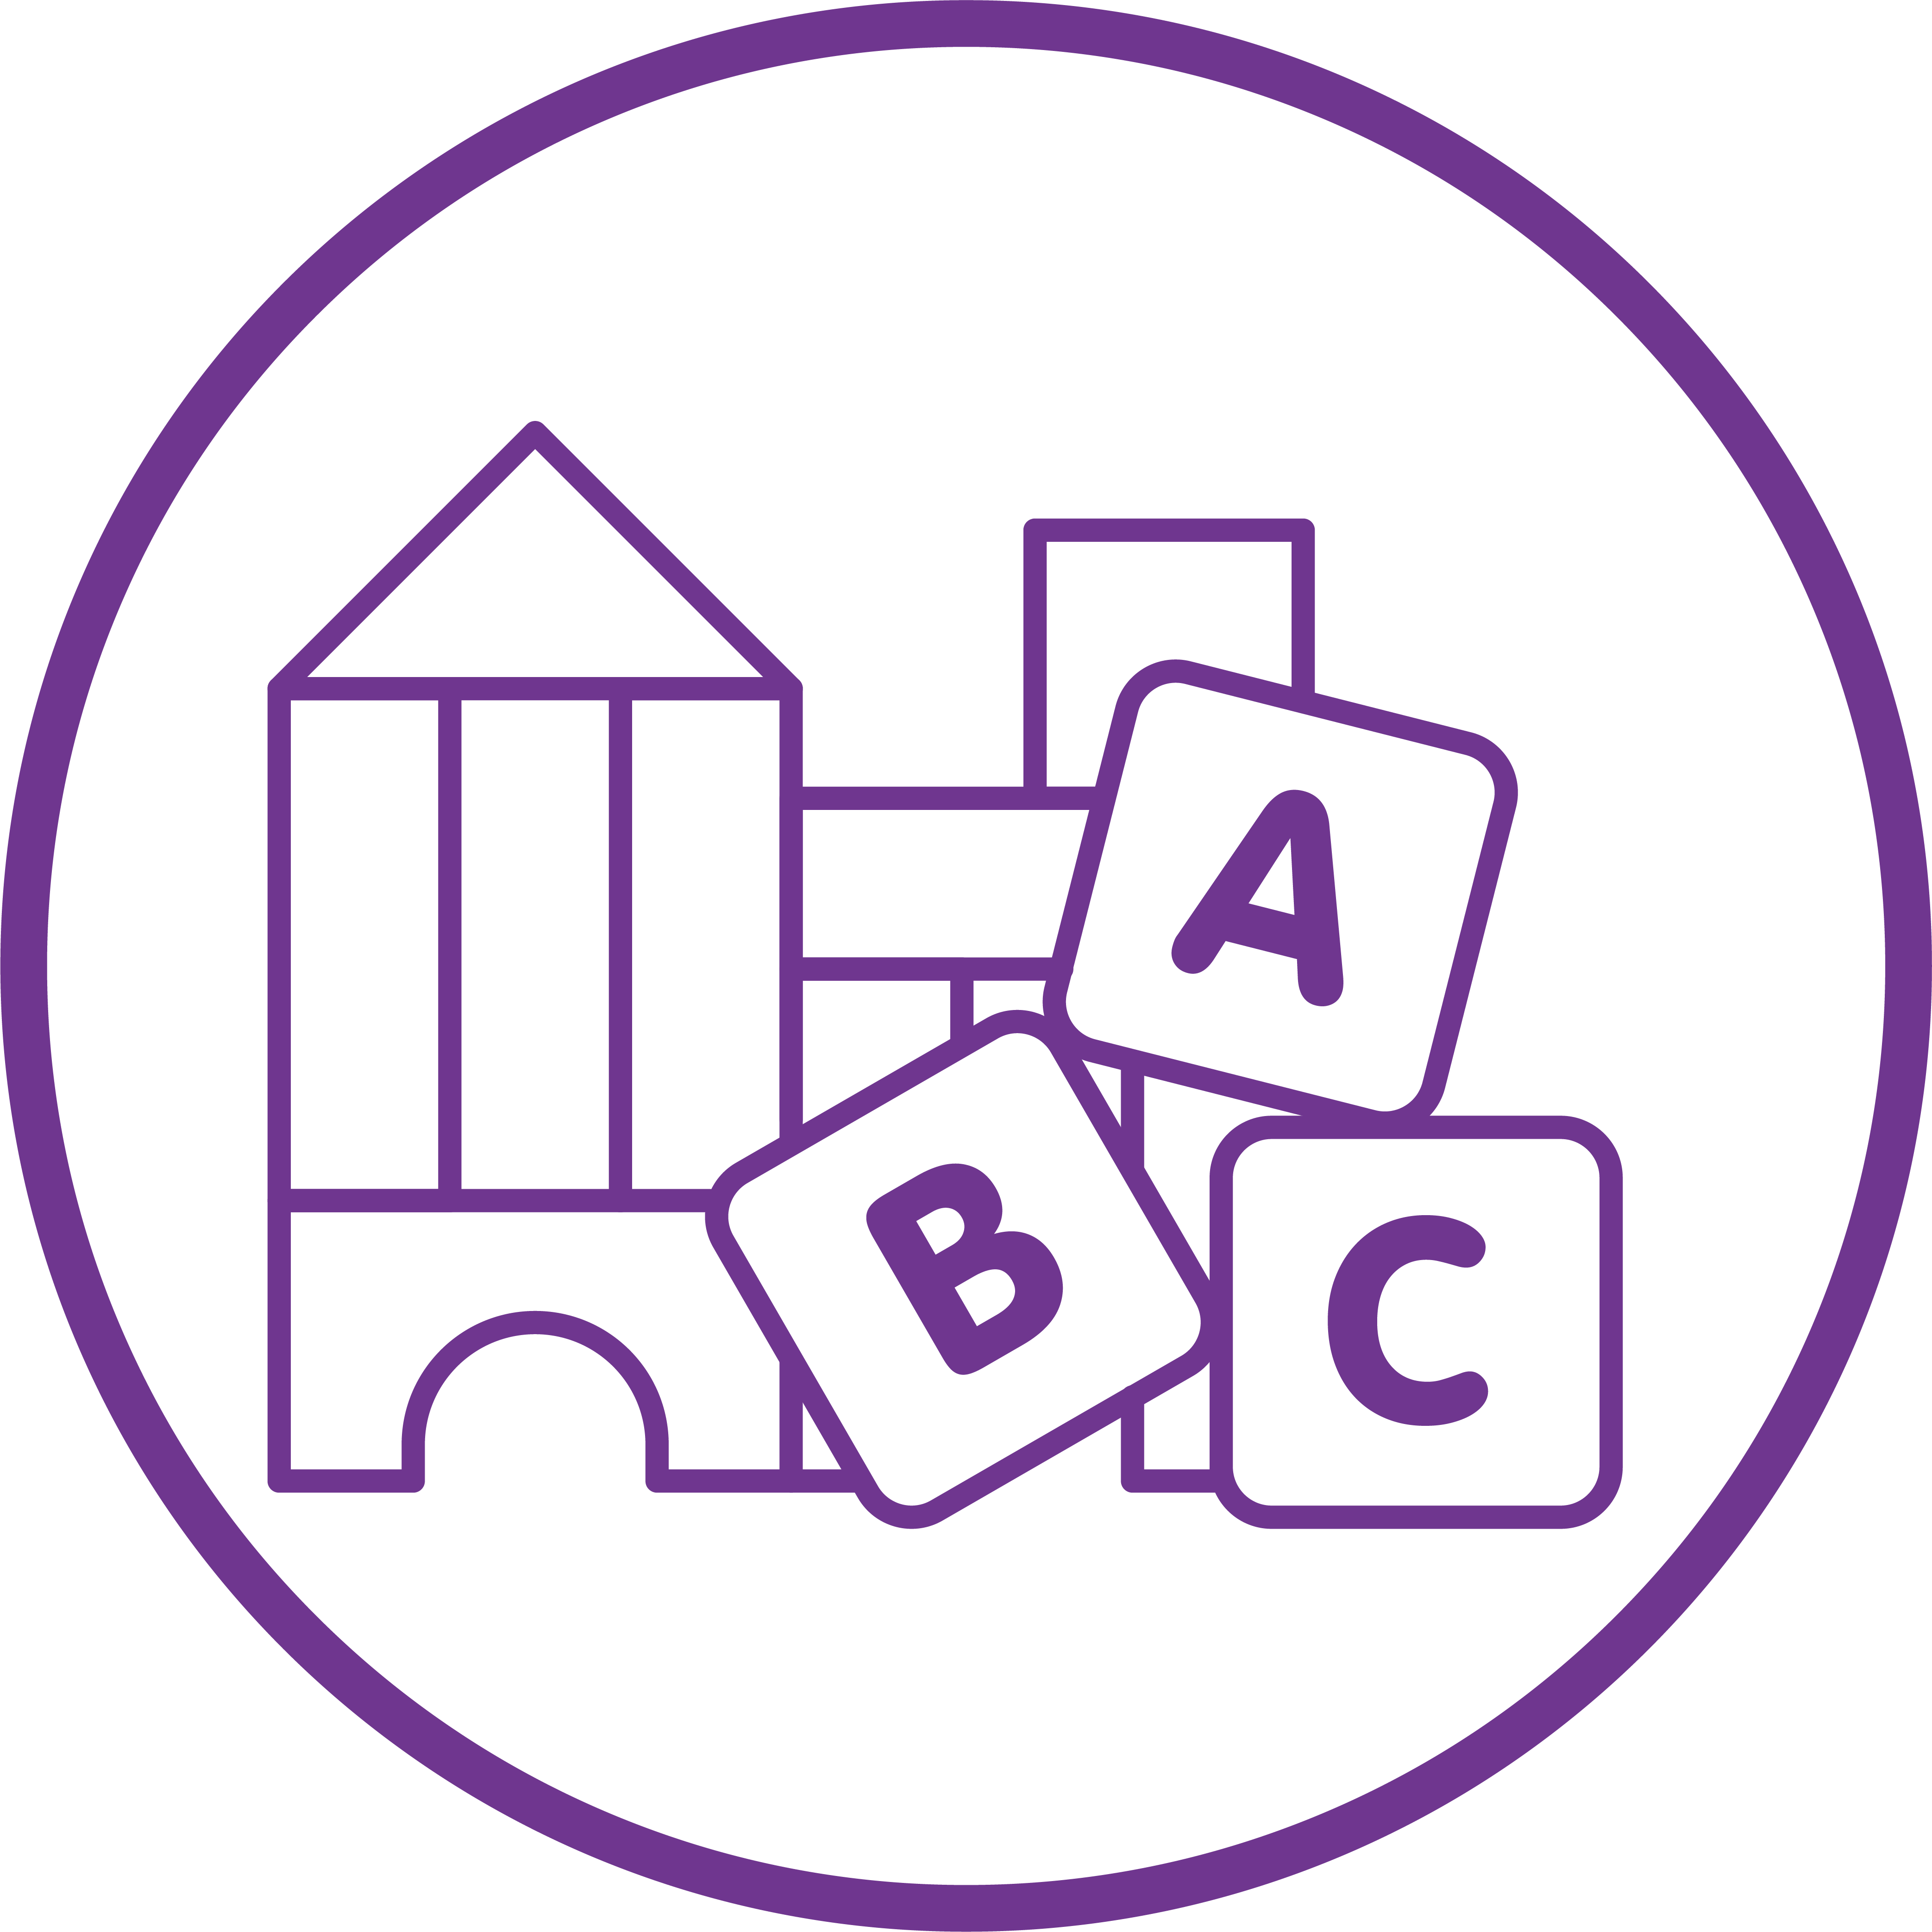 Sector-specific Industry Digital Plans: An icon representing the early childhood sector with alphabet blocks and a playhouse illustration